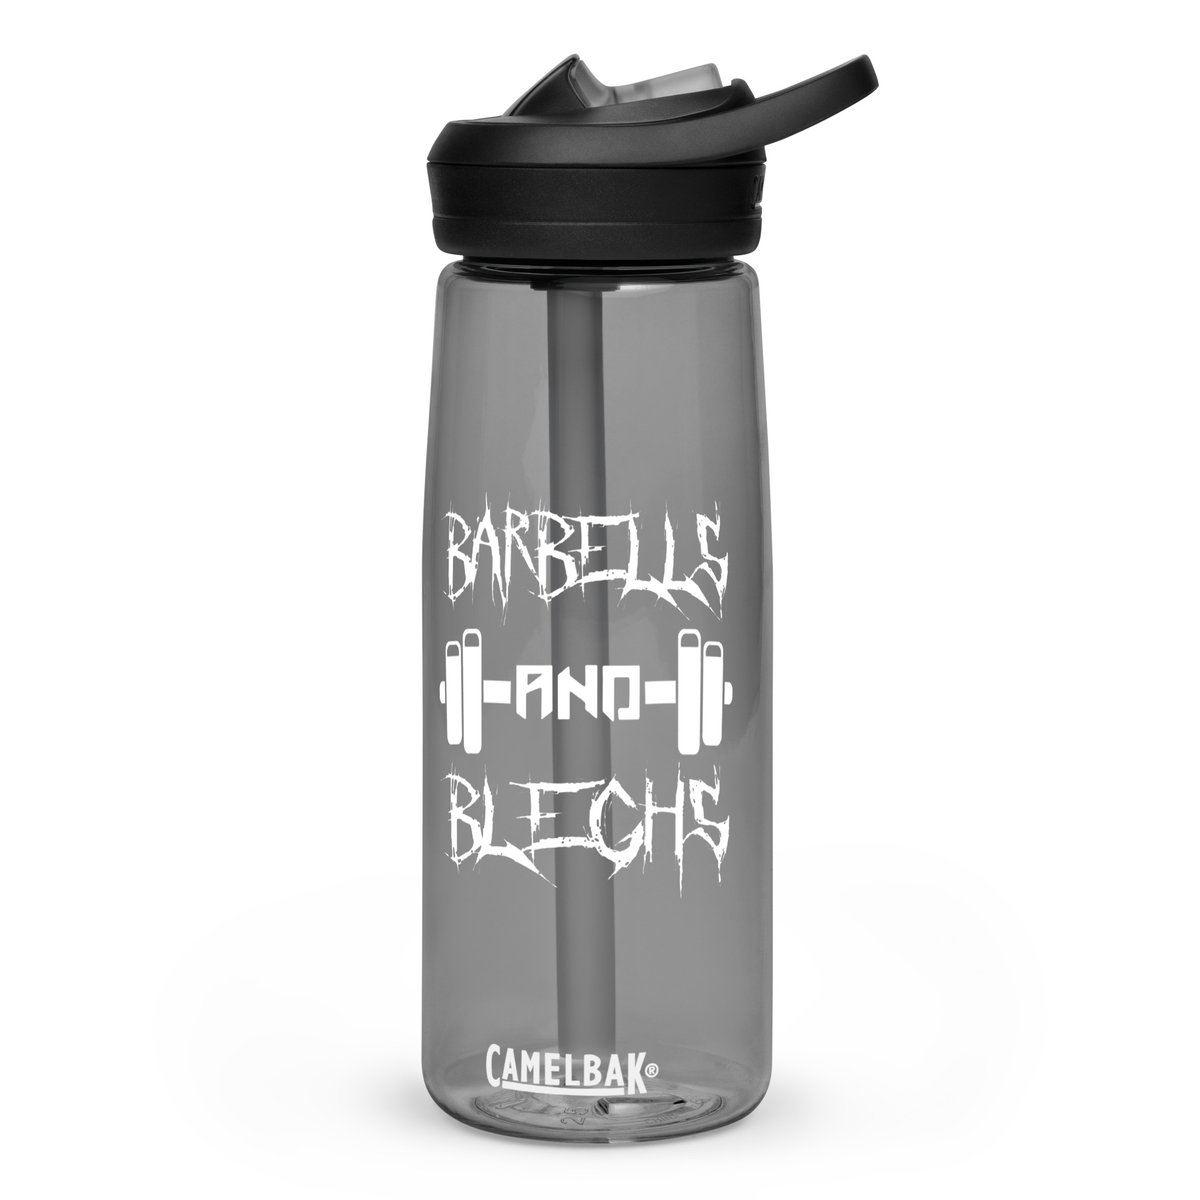 https://assets.bigcartel.com/product_images/363782317/sports-water-bottle-charcoal-front-649eda1b644ca.jpg?auto=format&fit=max&h=1200&w...